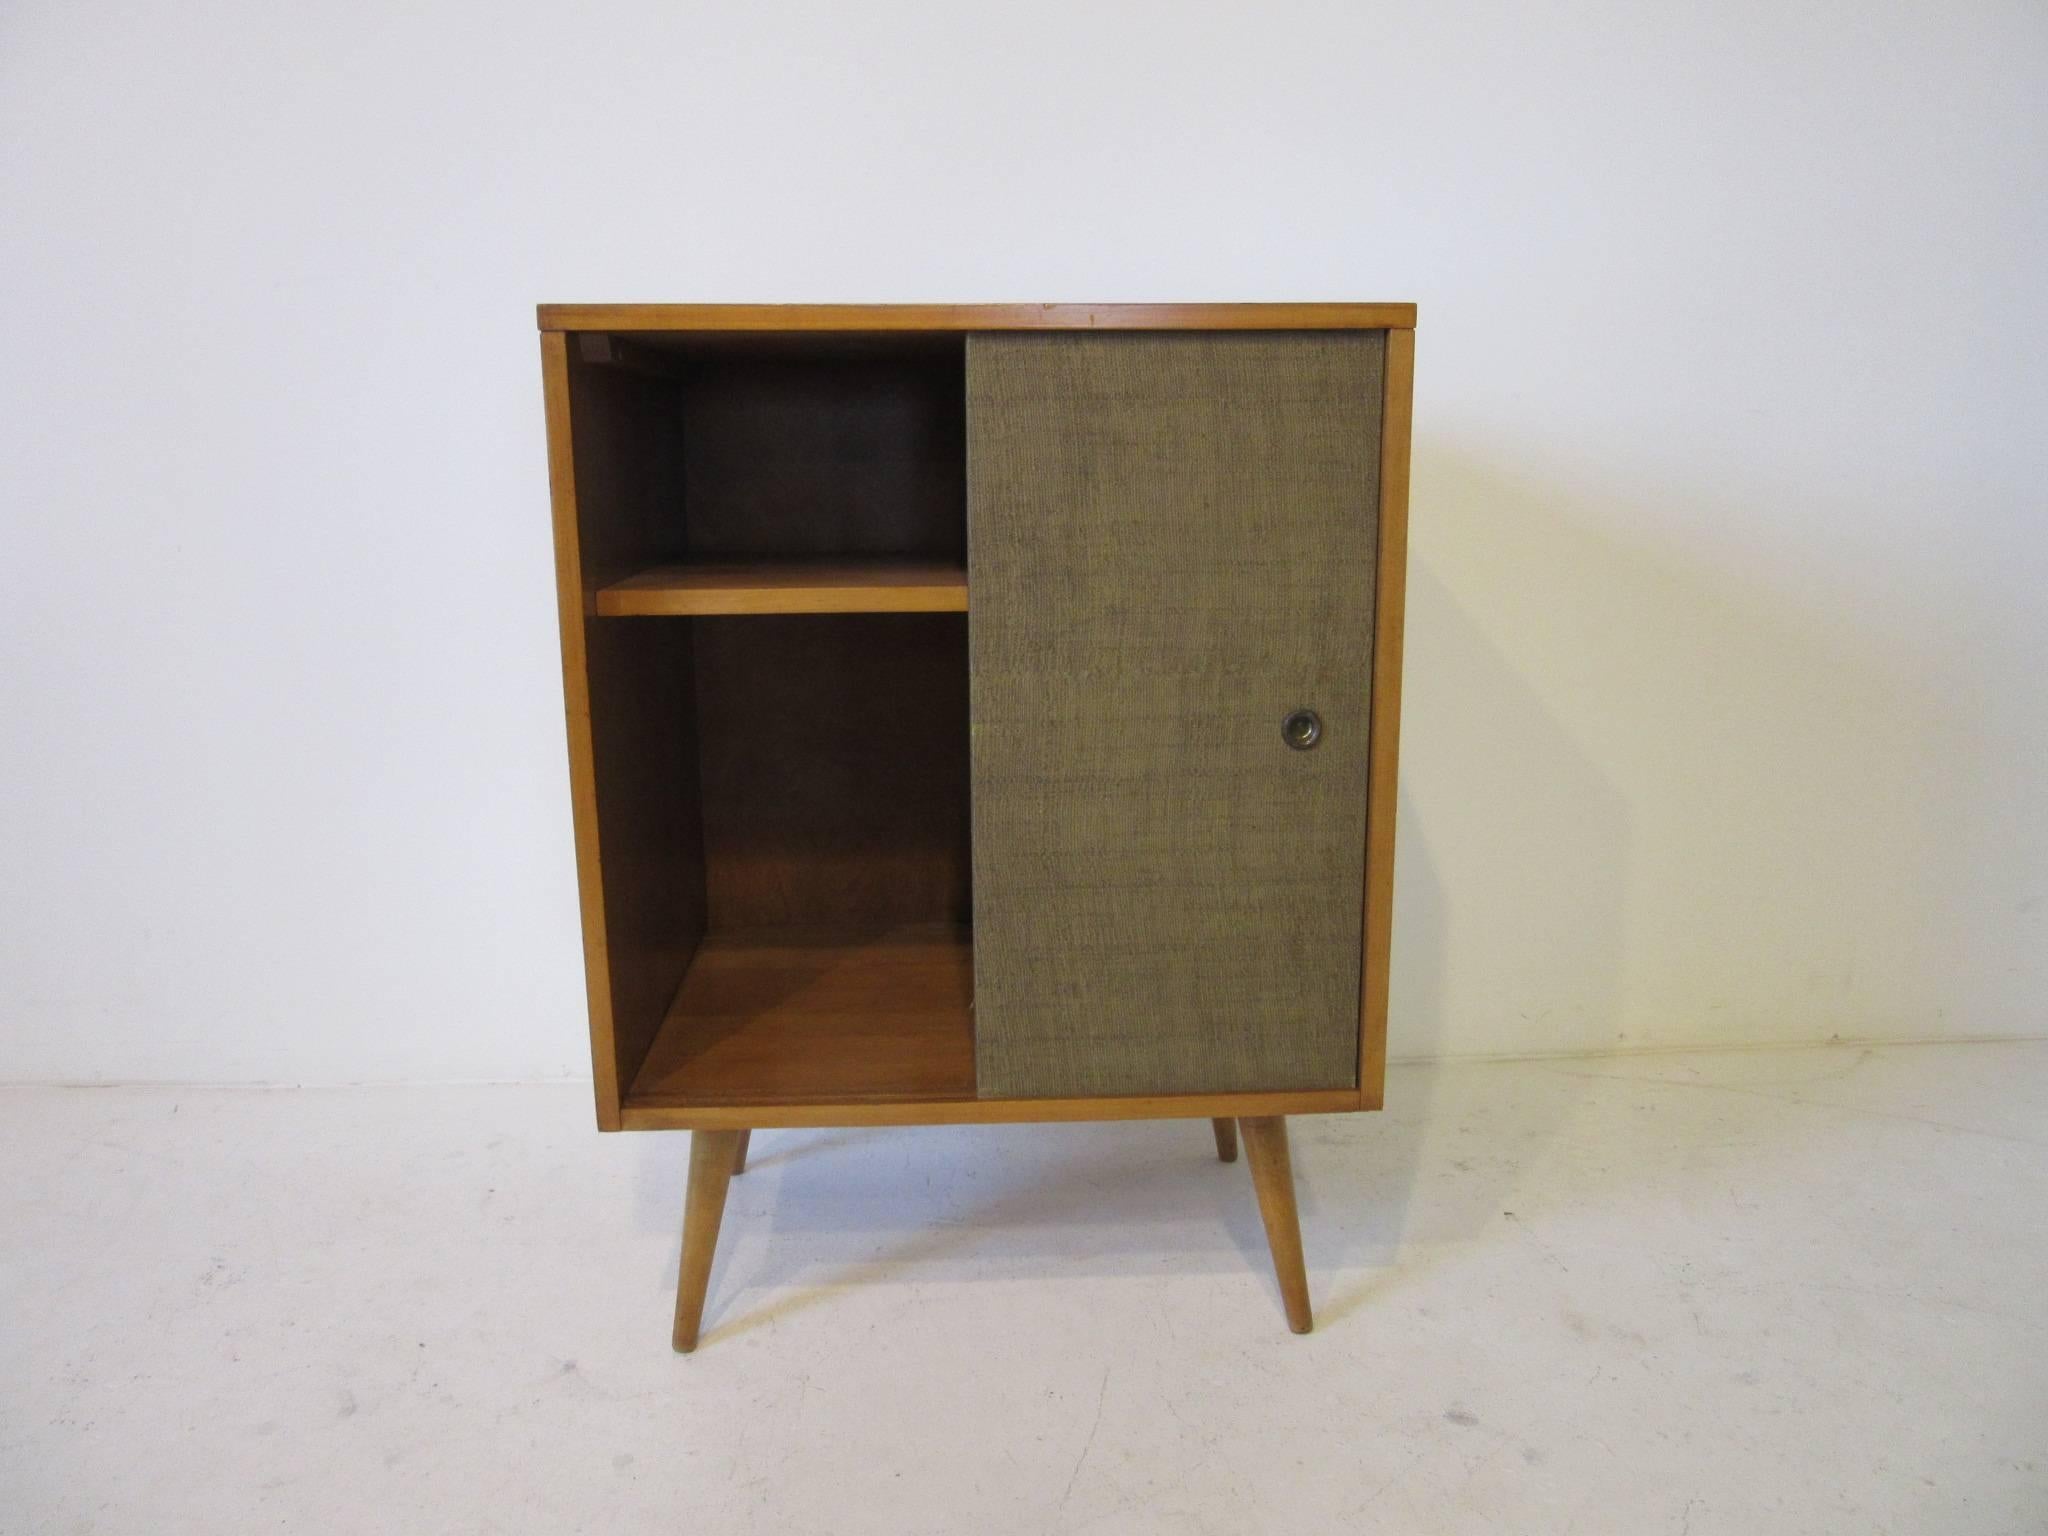 A smaller sized two piece McCobb solid maple wood credenza storage unit sitting on a smaller platform with conical legs and having two sliding grass cloth doors, manufactured by the Winchendon Furniture Company from their Planner Group Collection .